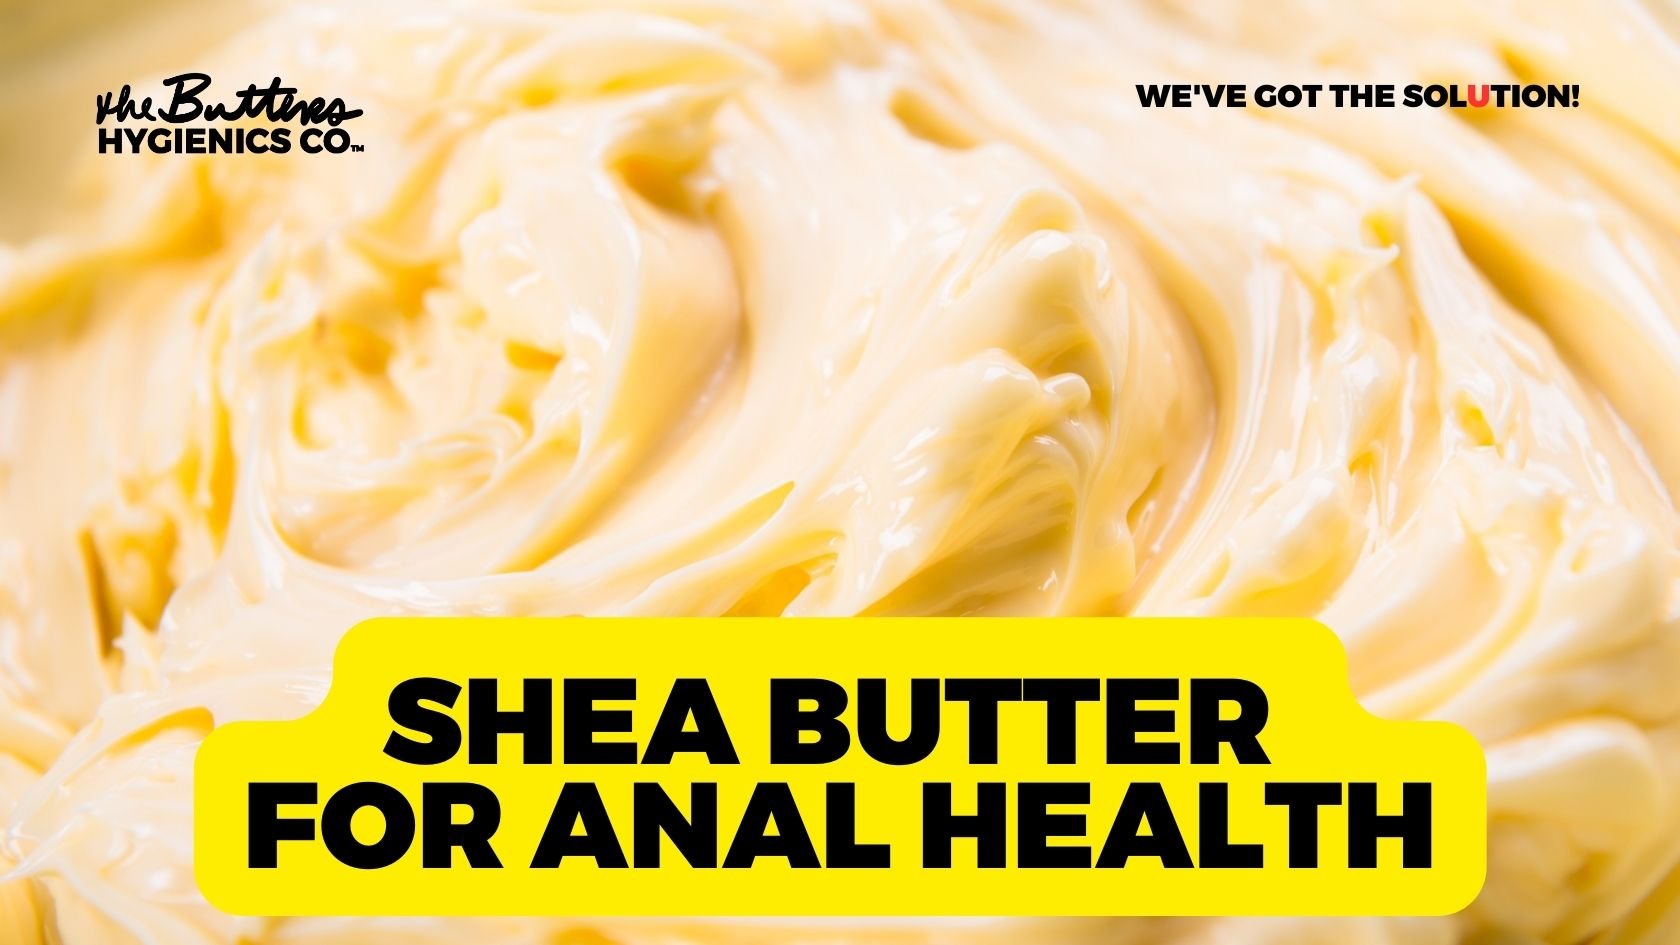 Shea Butter Booty Benefits of Shea Butter for Anal Sex, Hygiene — The Butters Hygienics photo photo image